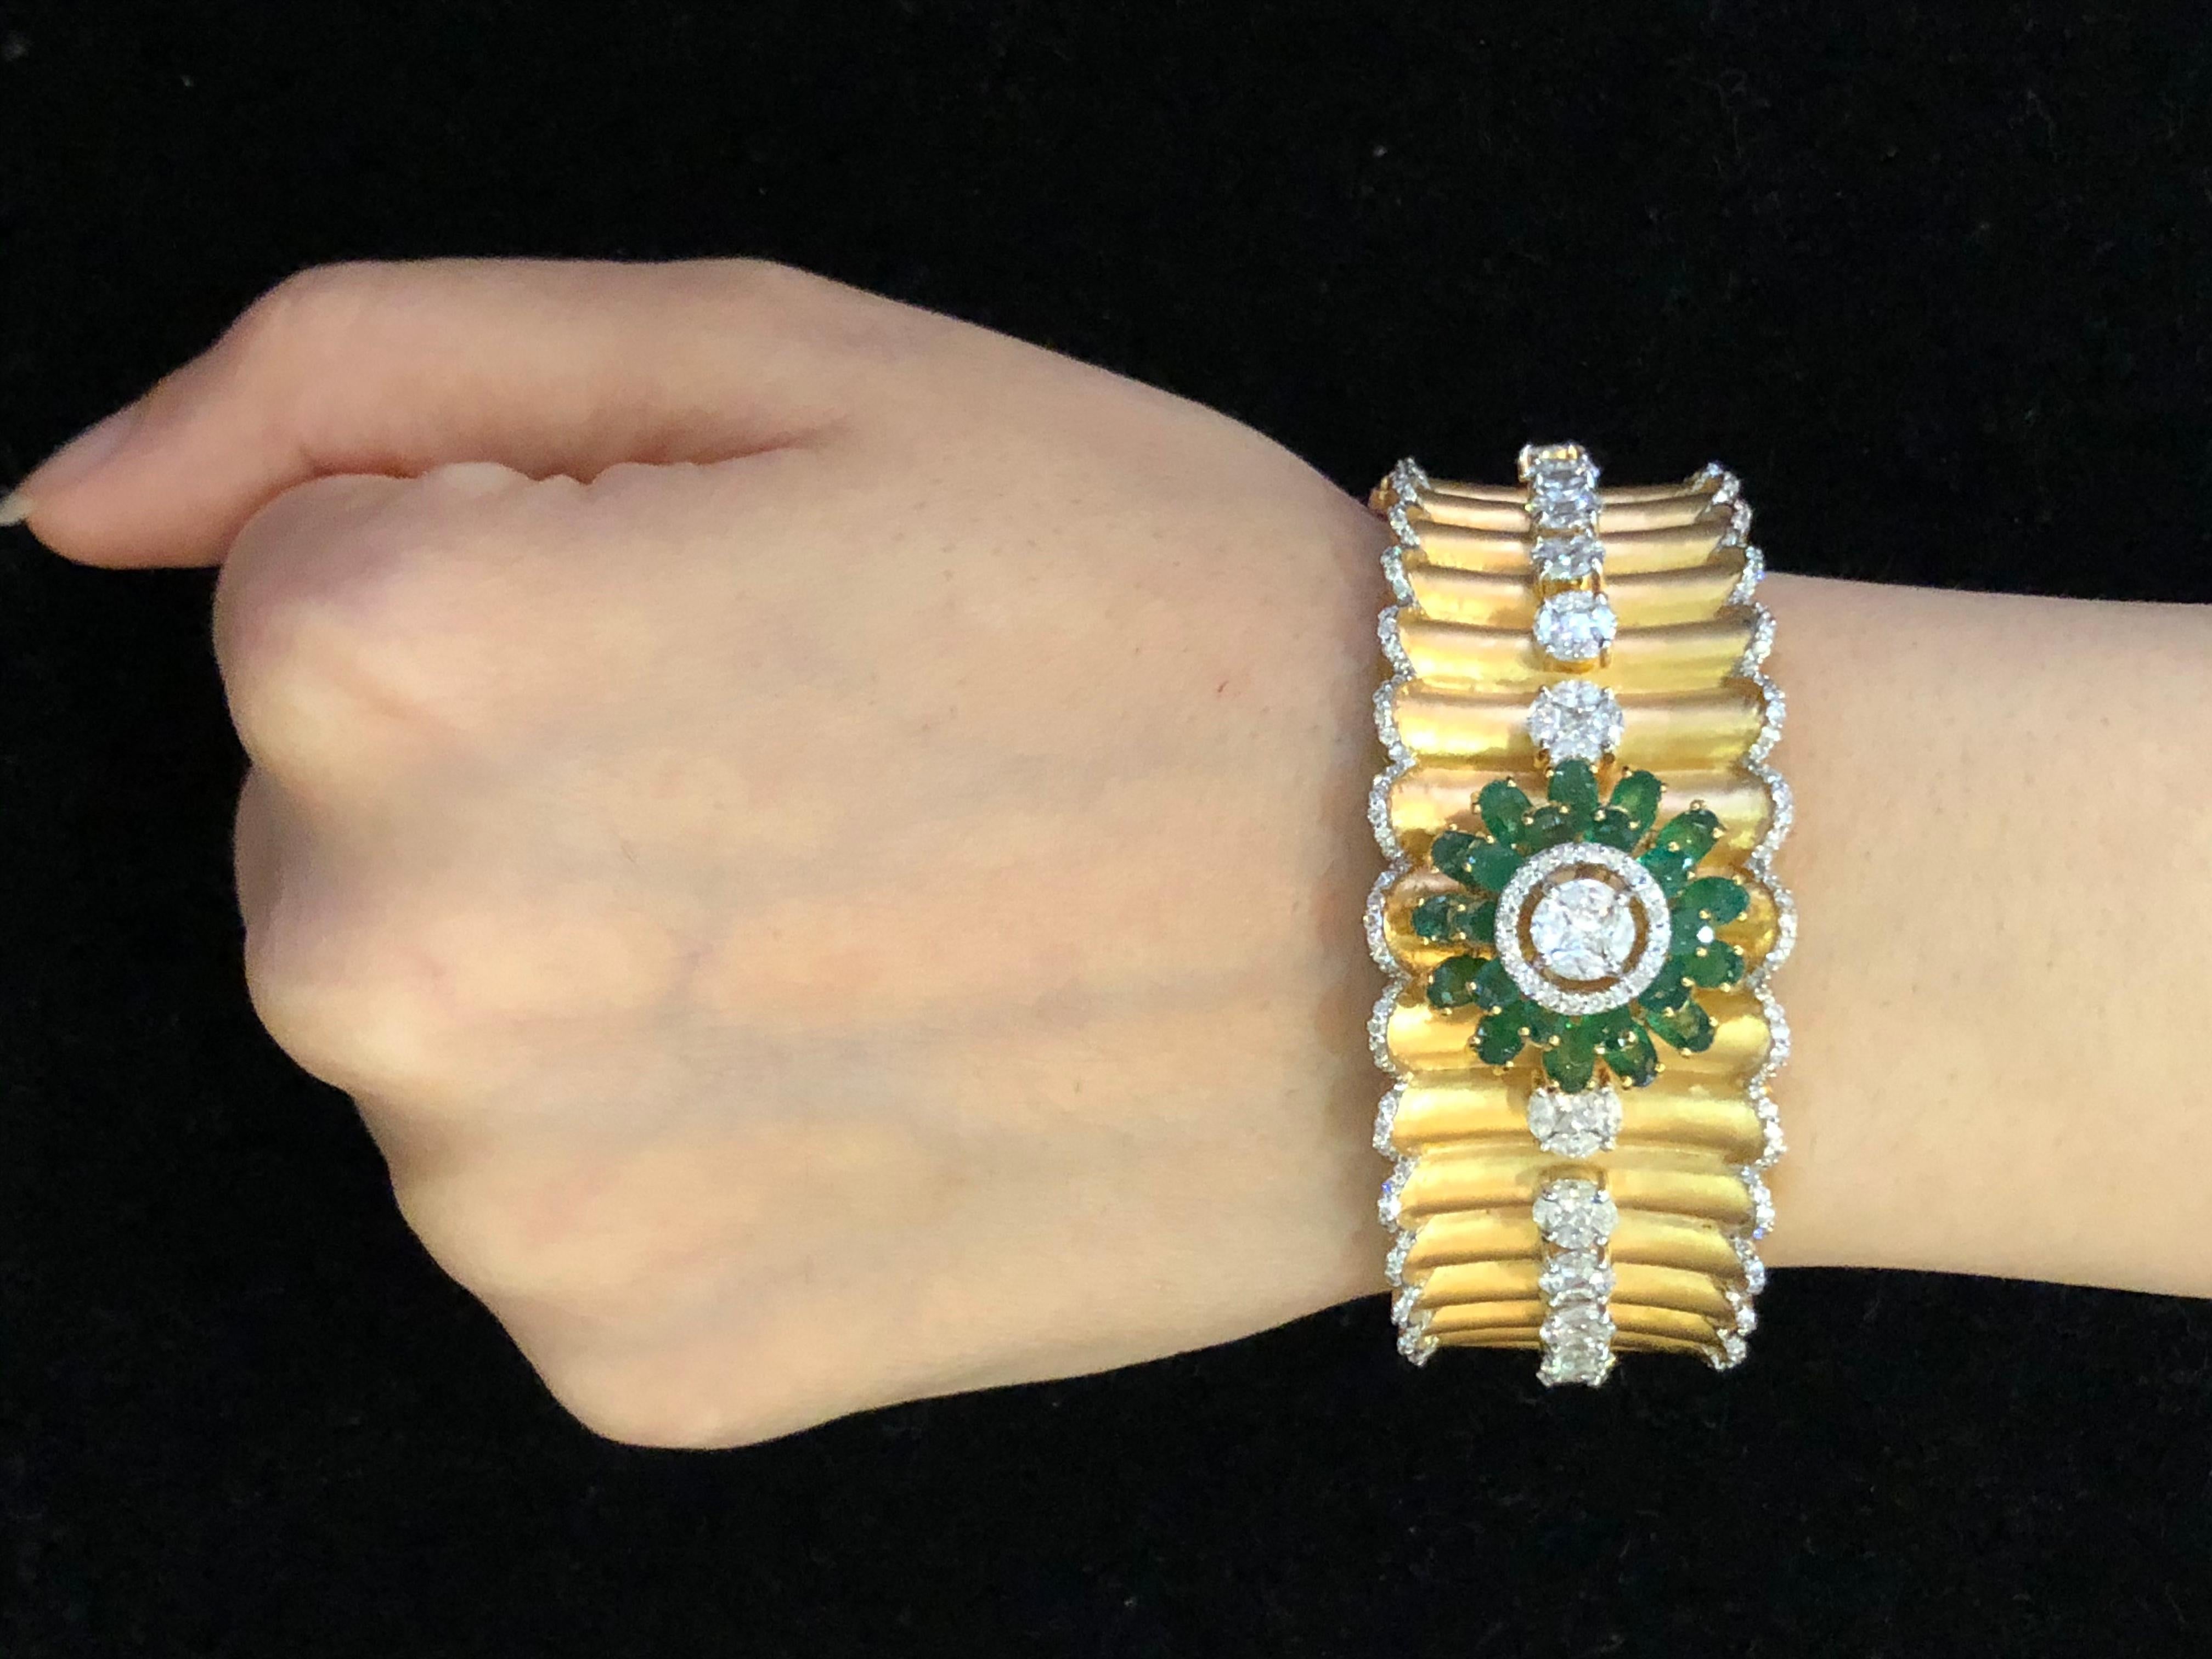 Adorn your wrist with our beautifully crafted emerald and diamond cuff bracelet featuring

Diamonds- 4.49 carats 
Emeralds- 3.81 carats 
Gold- 57.980 grams 18 karat 
Item Code: DBR-BFD
NOTE: This bracelet can be customised according to your wrist